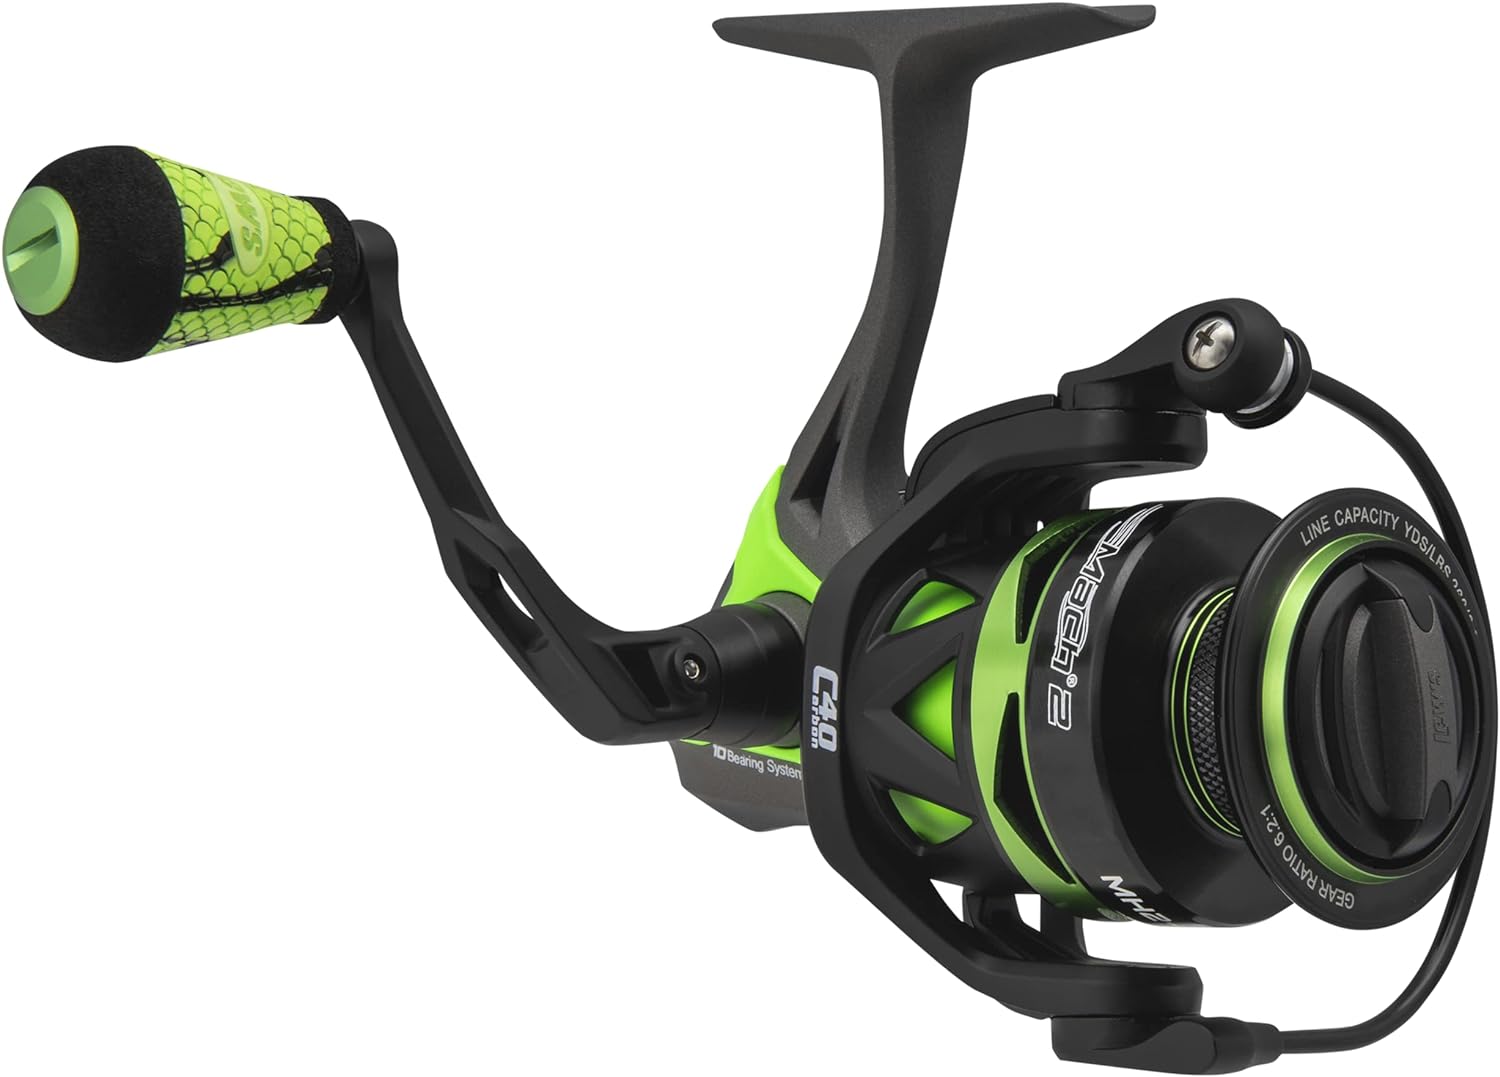 Lew's Mach 2 Spinning Reel: A High-Quality Fishing Reel for Anglers